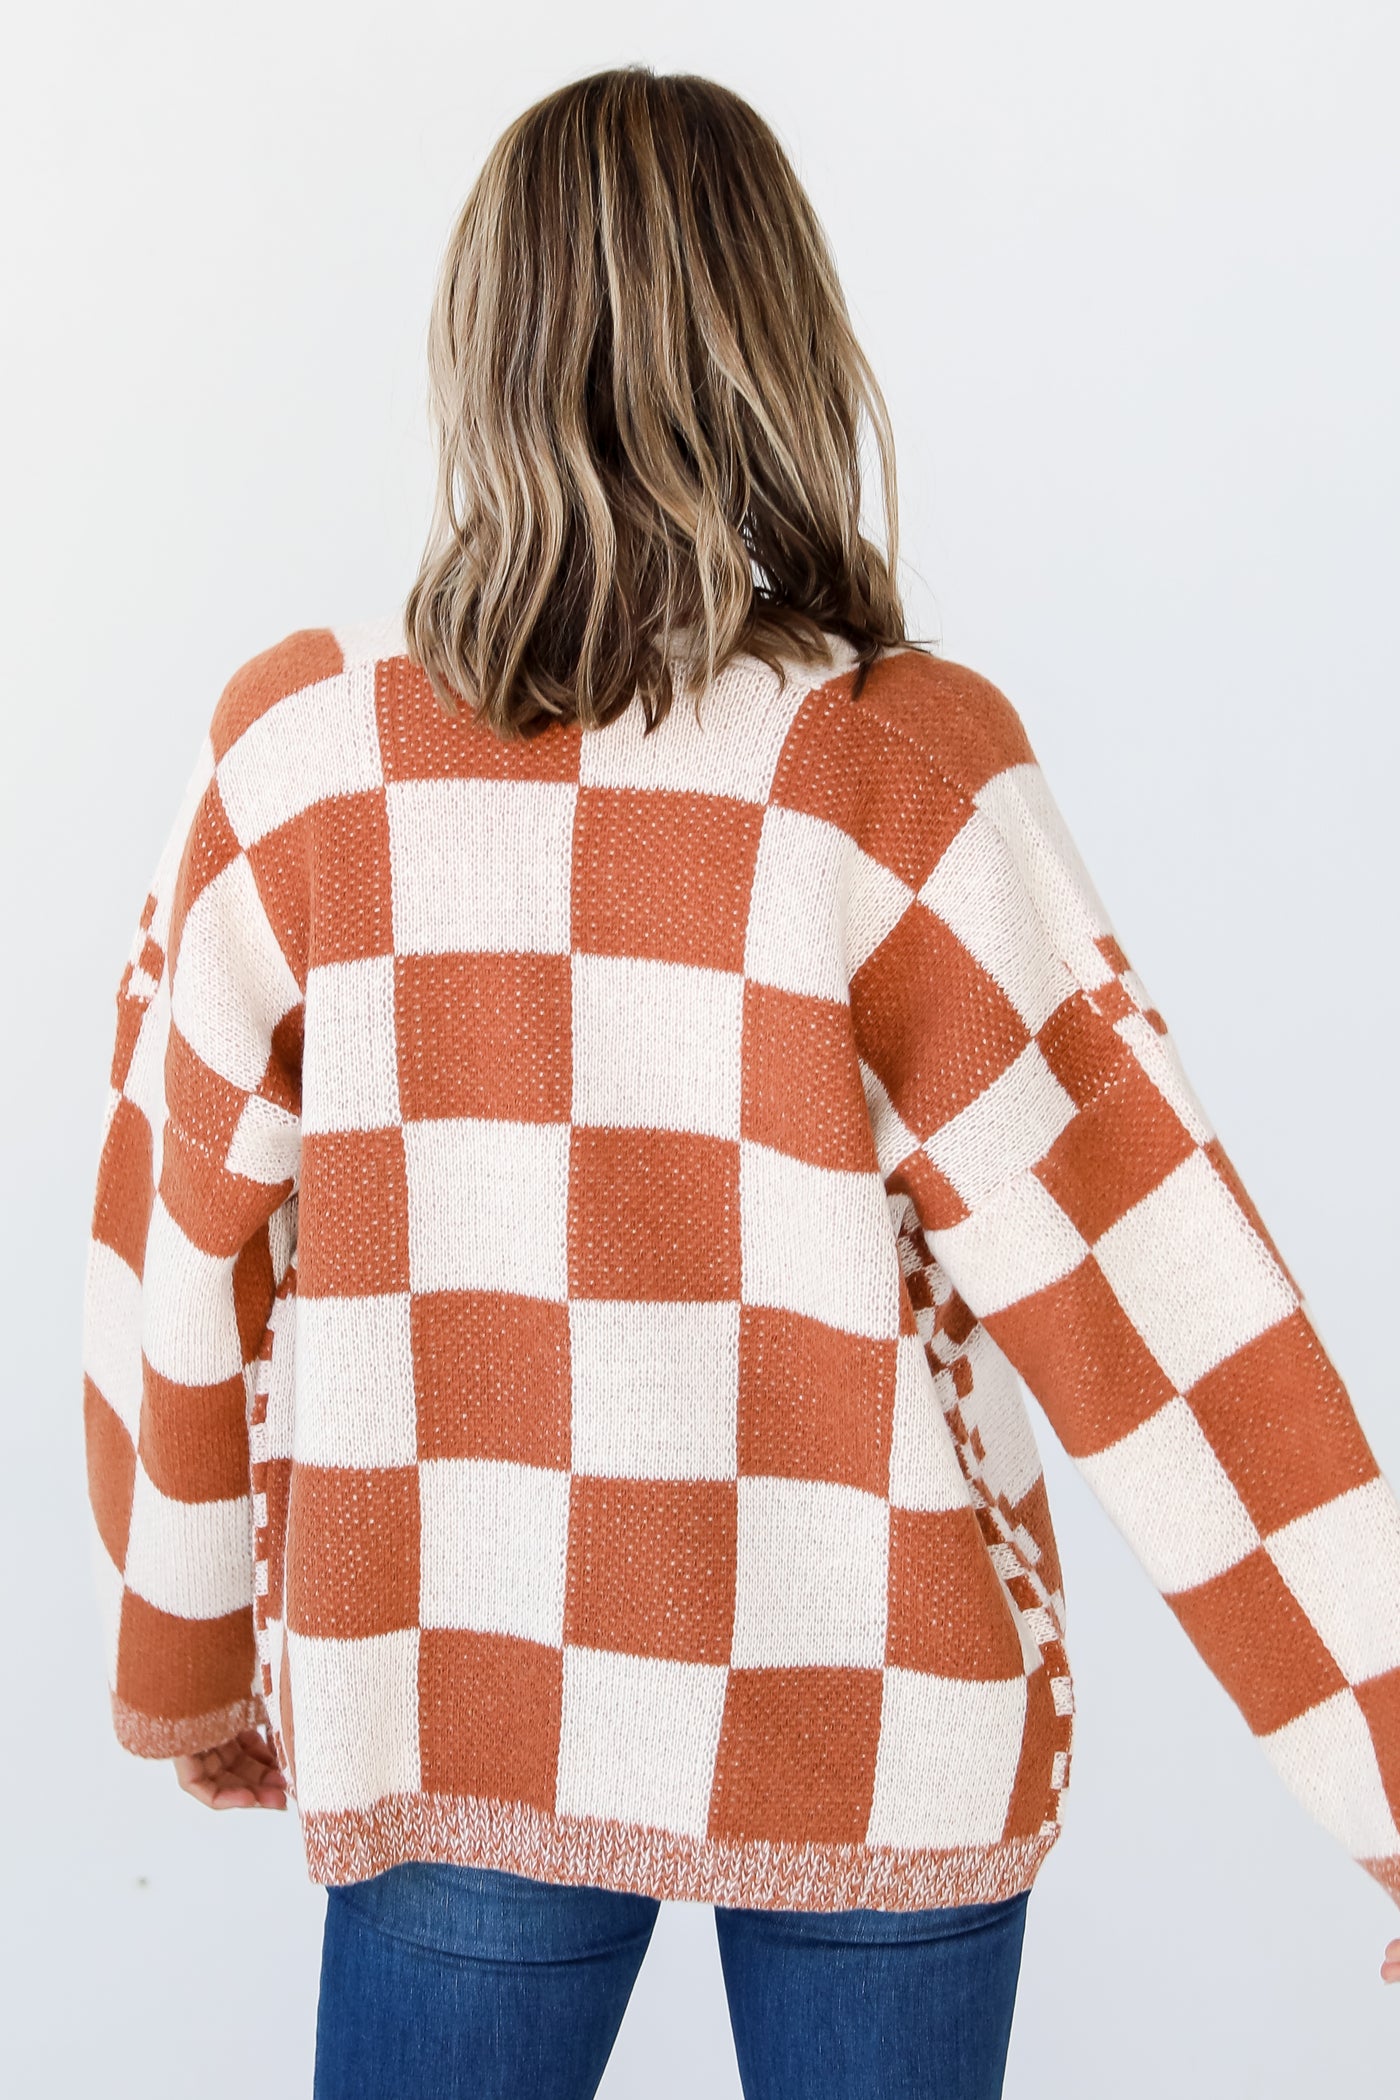 Checkered Sweater Cardigan back view